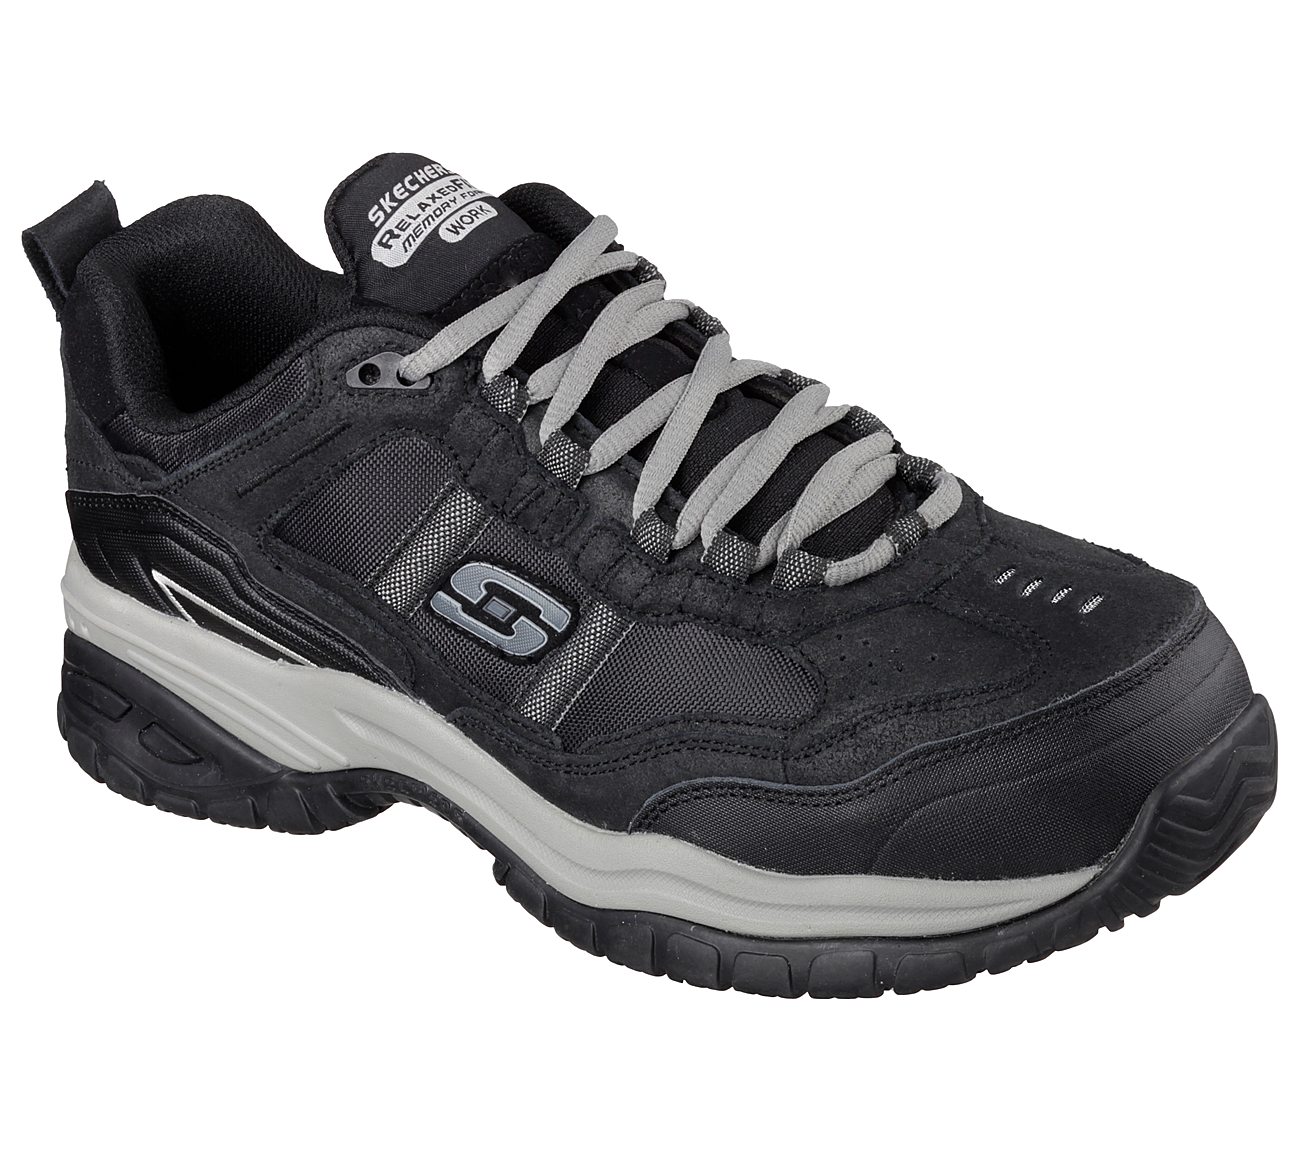 skechers shoes hover to zoom ekgoiev